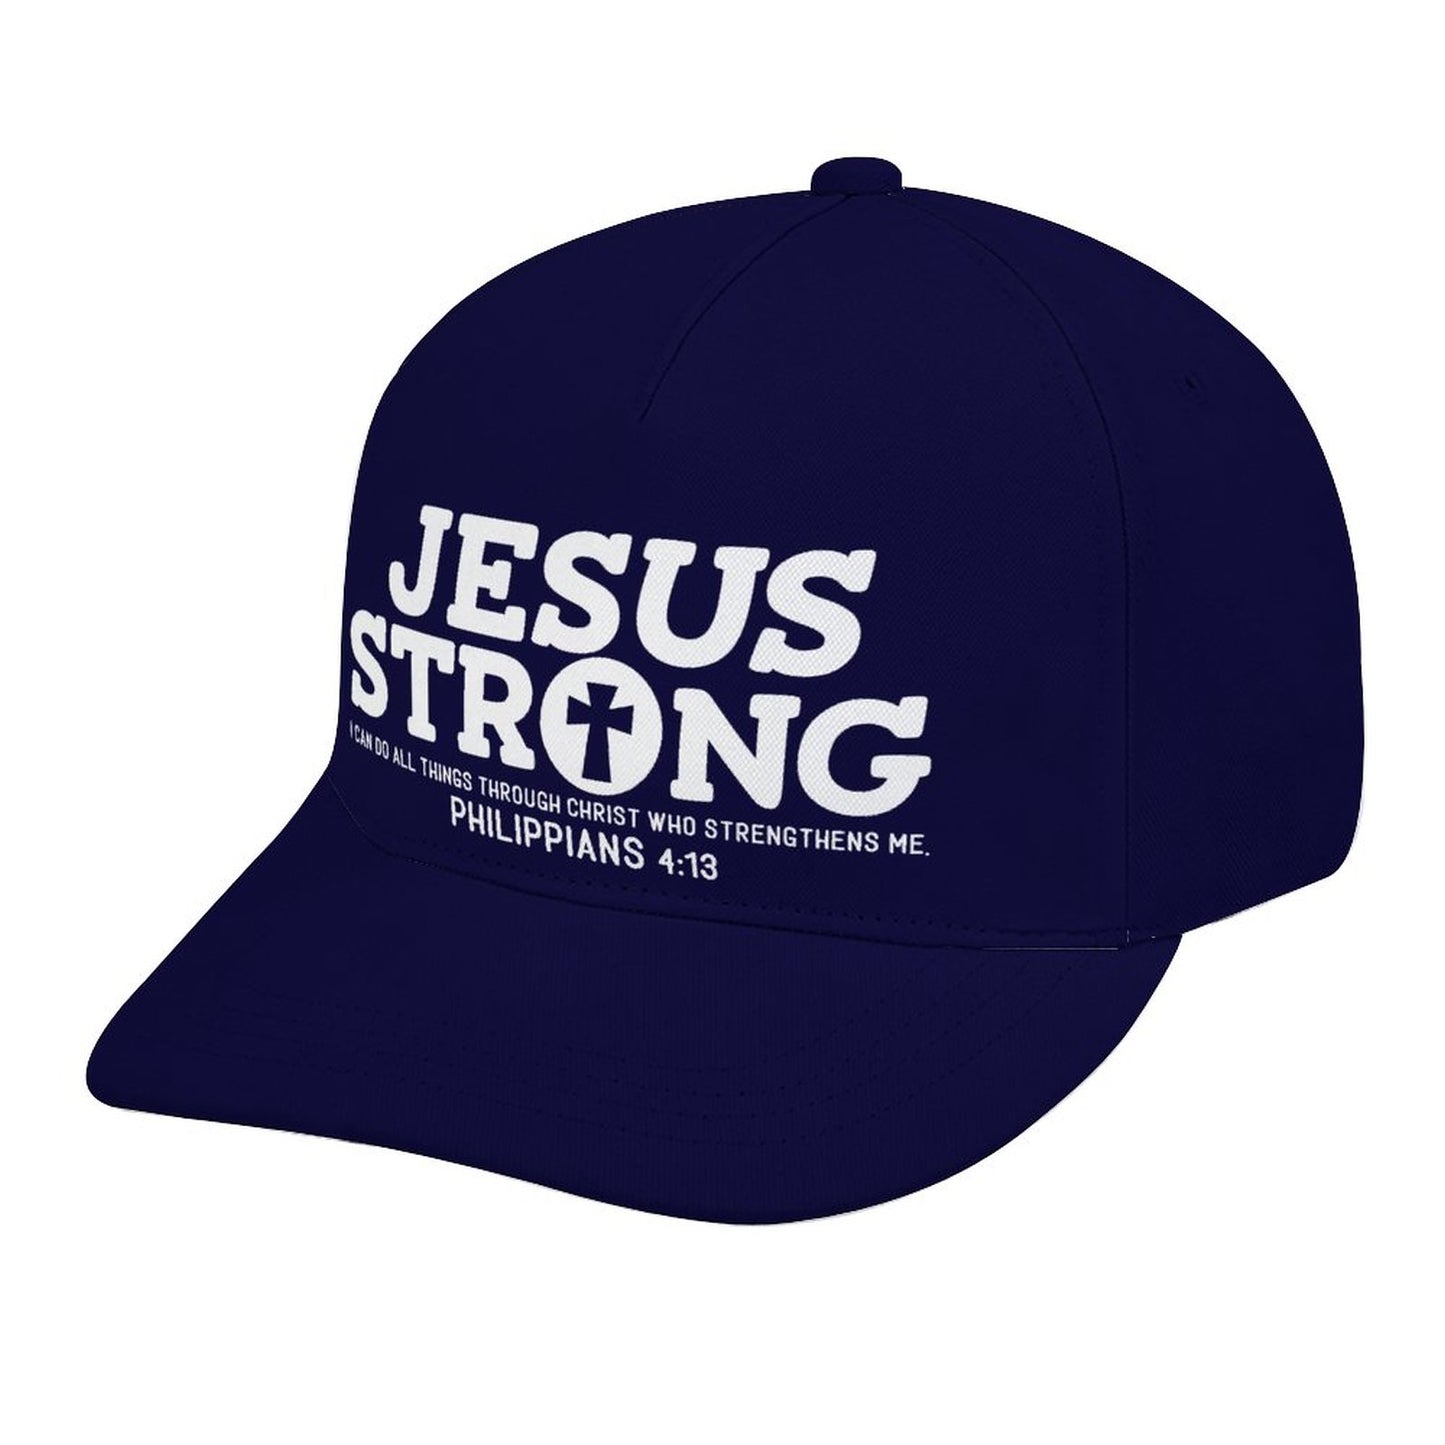 Jesus Strong I Can Do All Things Christian Hat